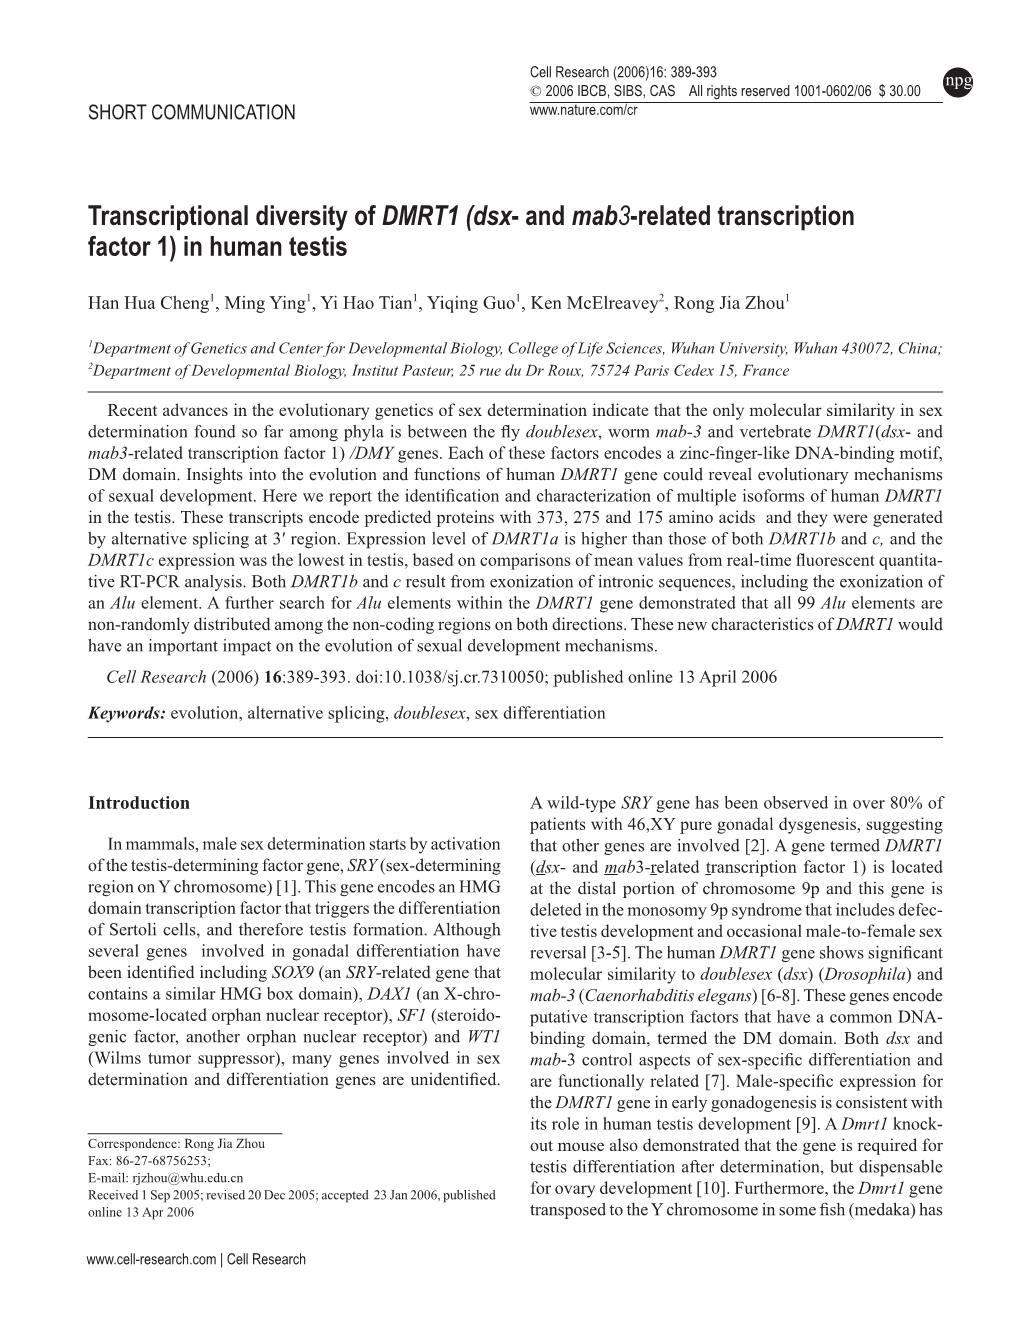 (Dsx- and Mab3-Related Transcription Factor 1) in Human Testis